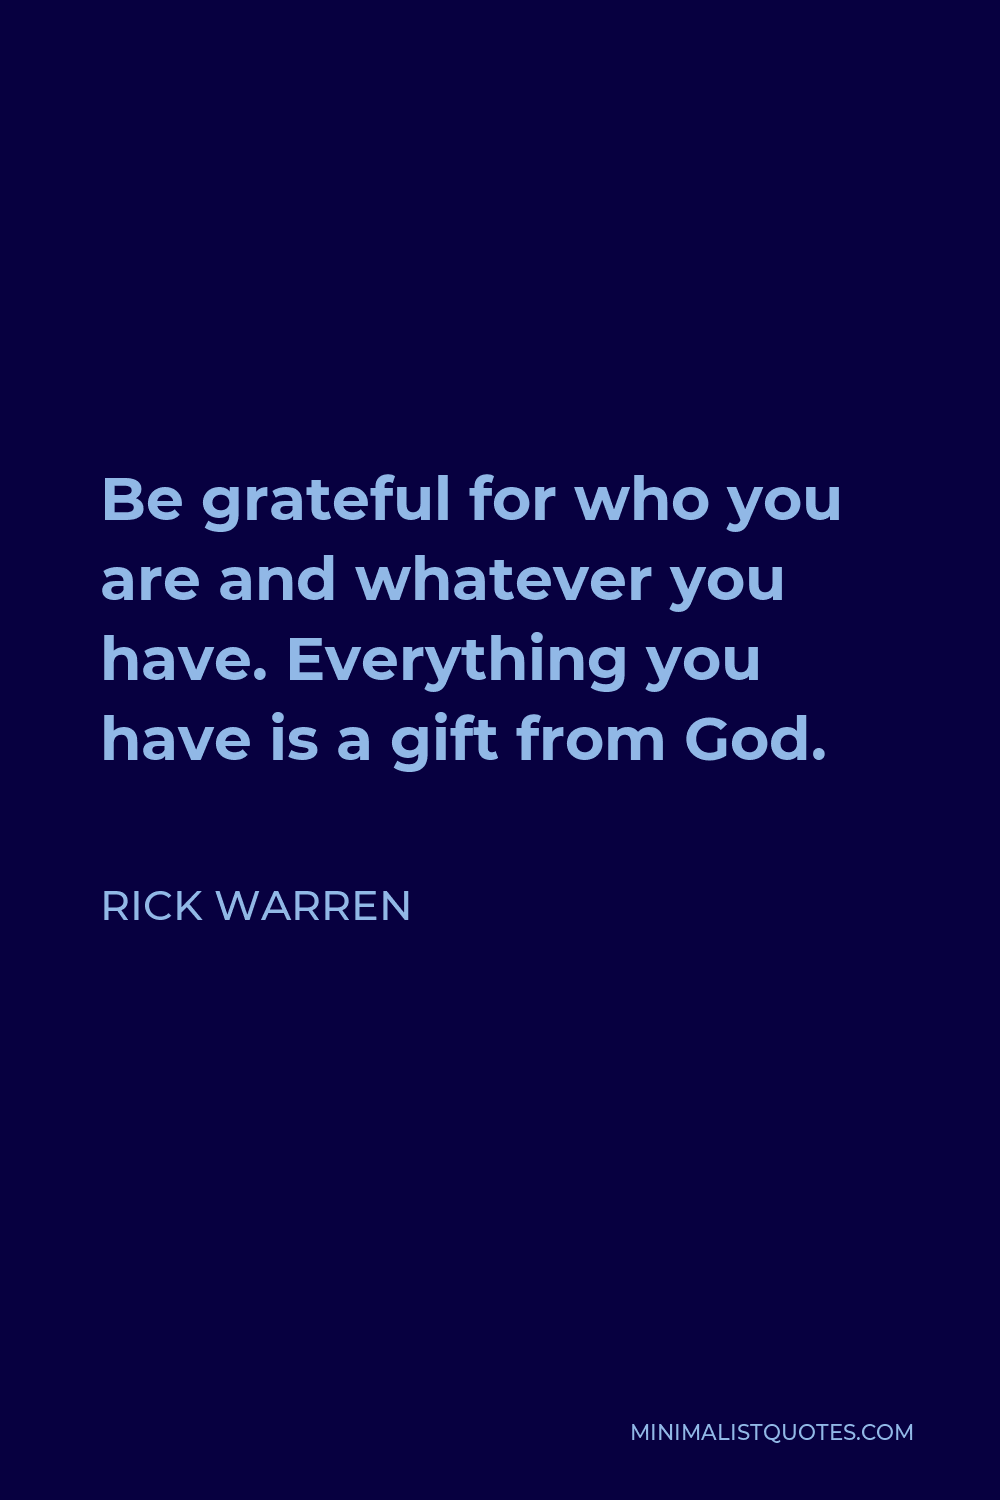 Rick Warren Quote - Be grateful for who you are and whatever you have. Everything you have is a gift from God.